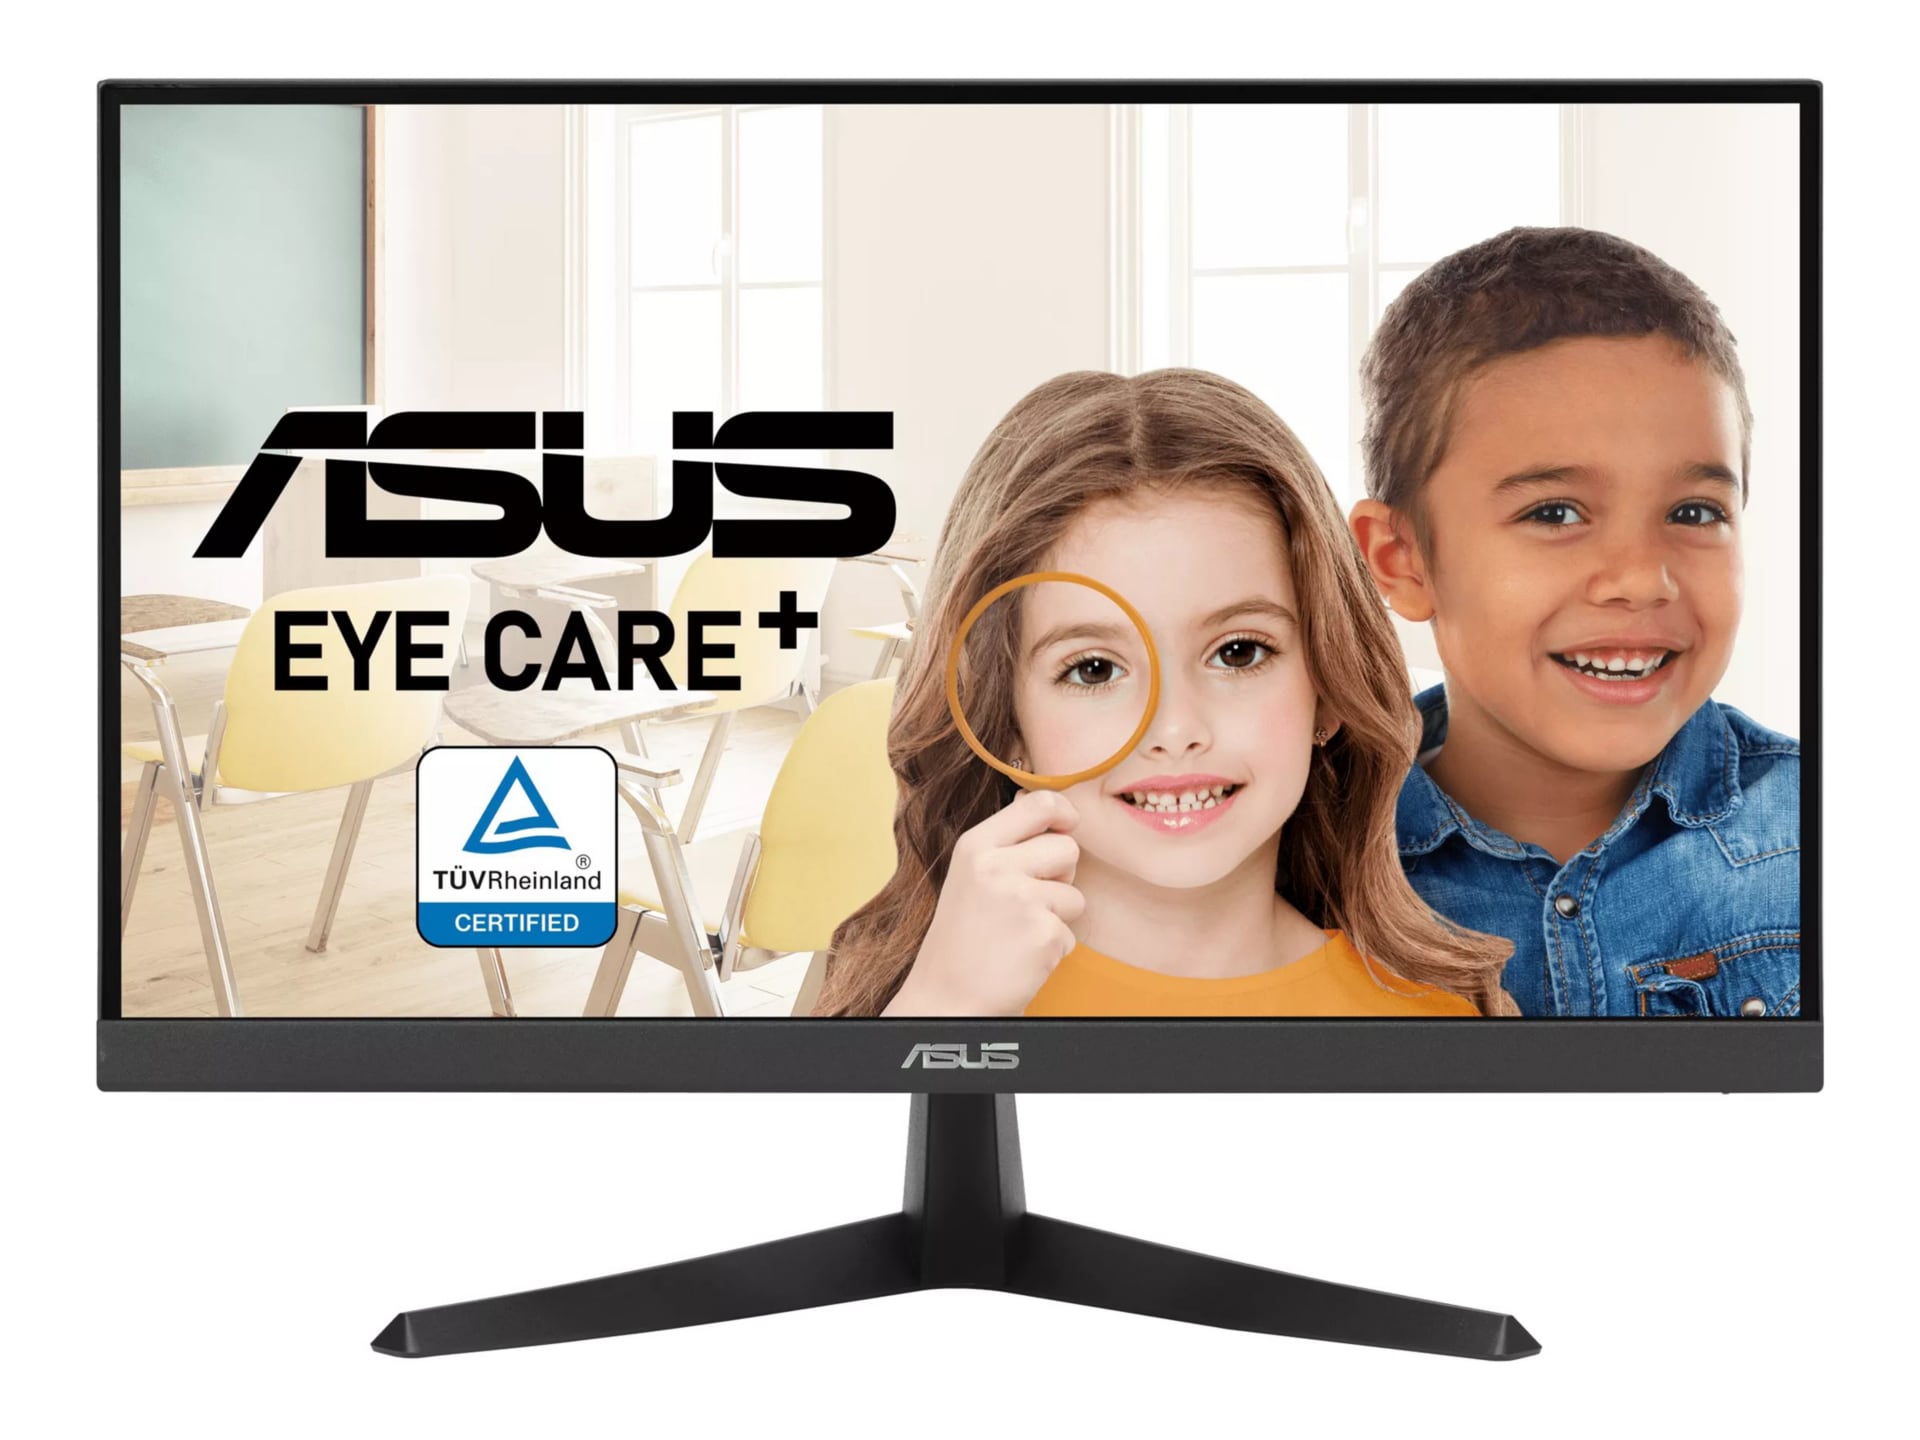 ASUS VY229HE - LED monitor - Full HD (1080p) - 22"